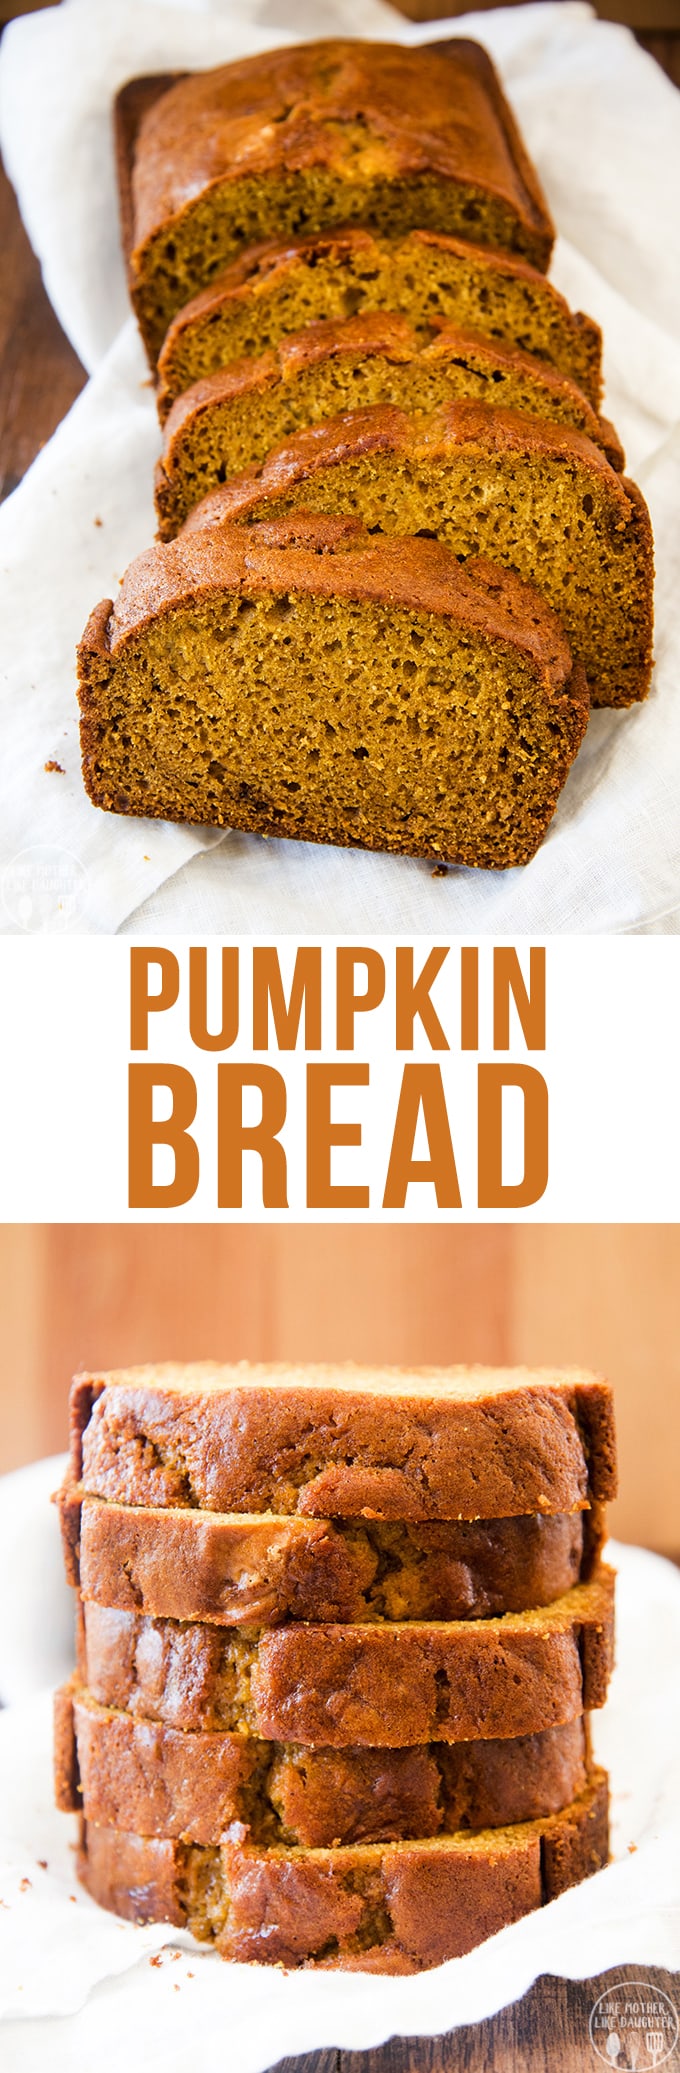 Pumpkin Bread is a perfectly spiced fall favorite, packed full of cinnamon, and pumpkin flavors in a moist, rich and delicious bread.